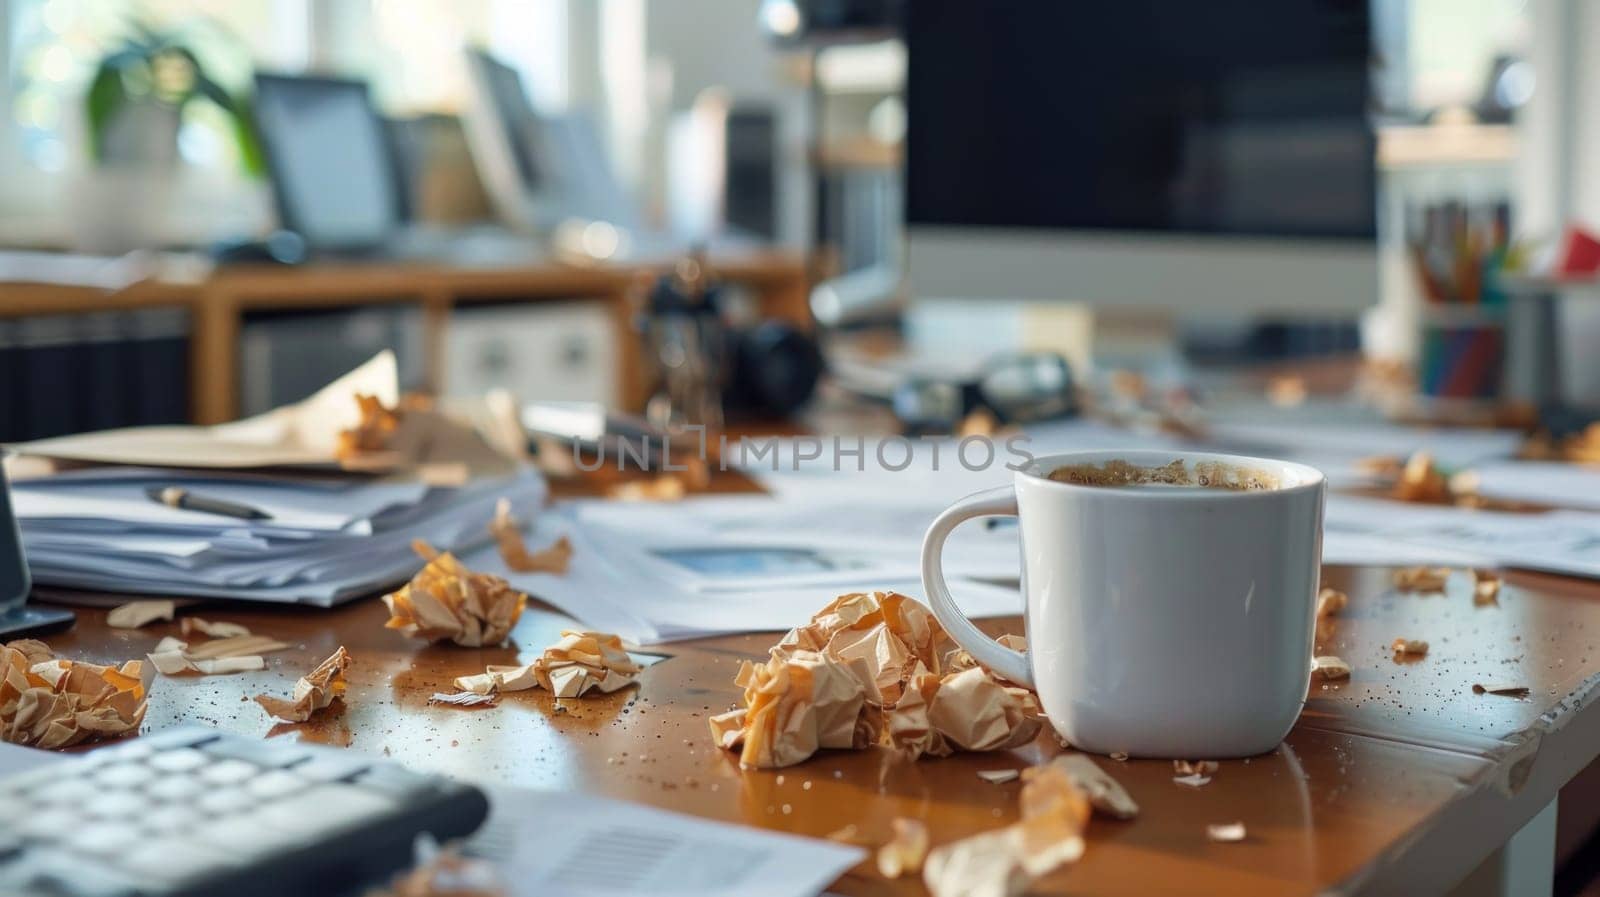 A messy desk with a spilled coffee cup, crumpled papers, and a deserted computer monitor..